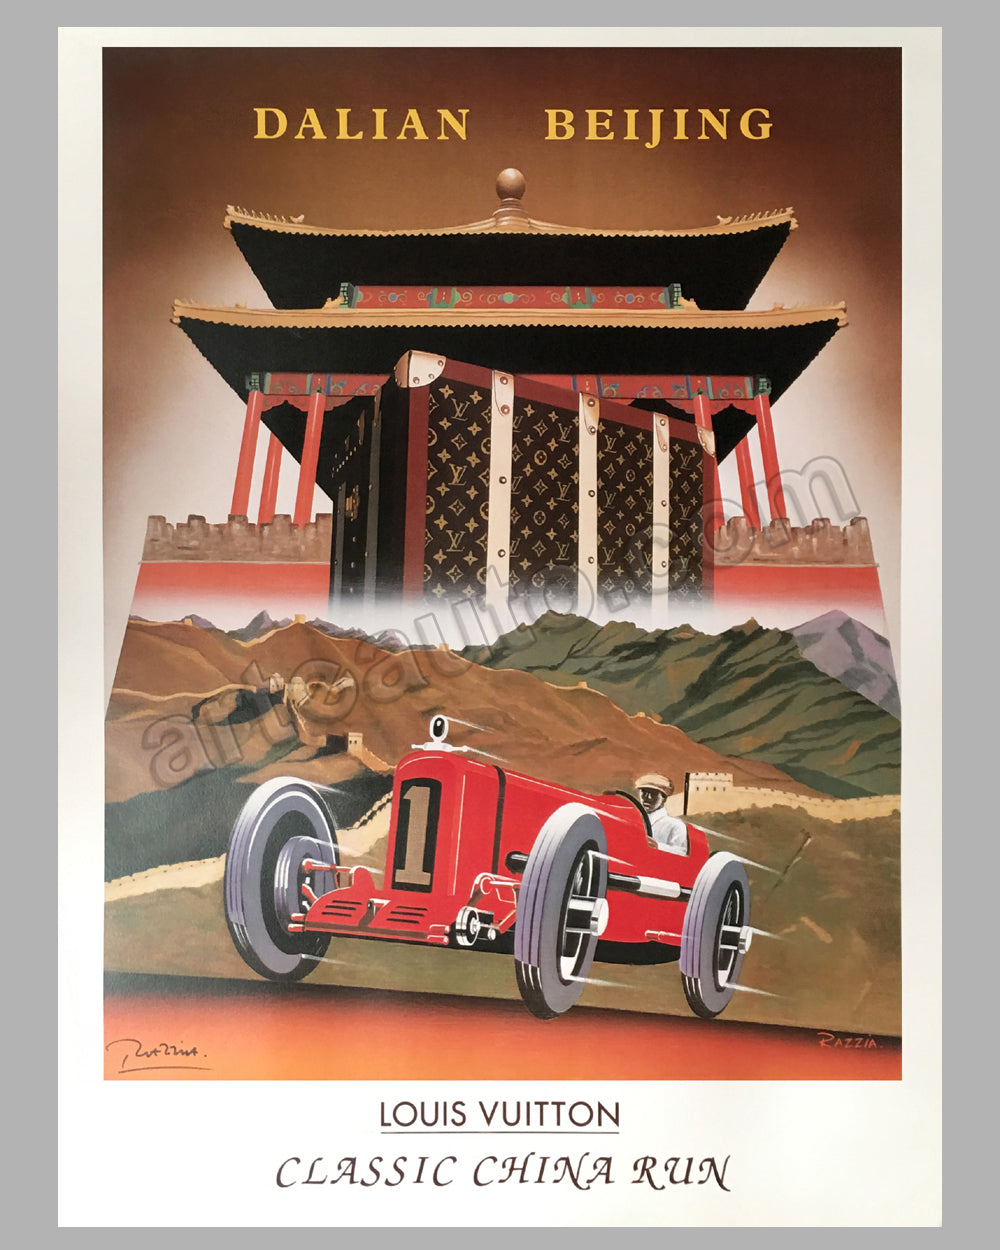 Louis Vuitton: The Art of the Automobile